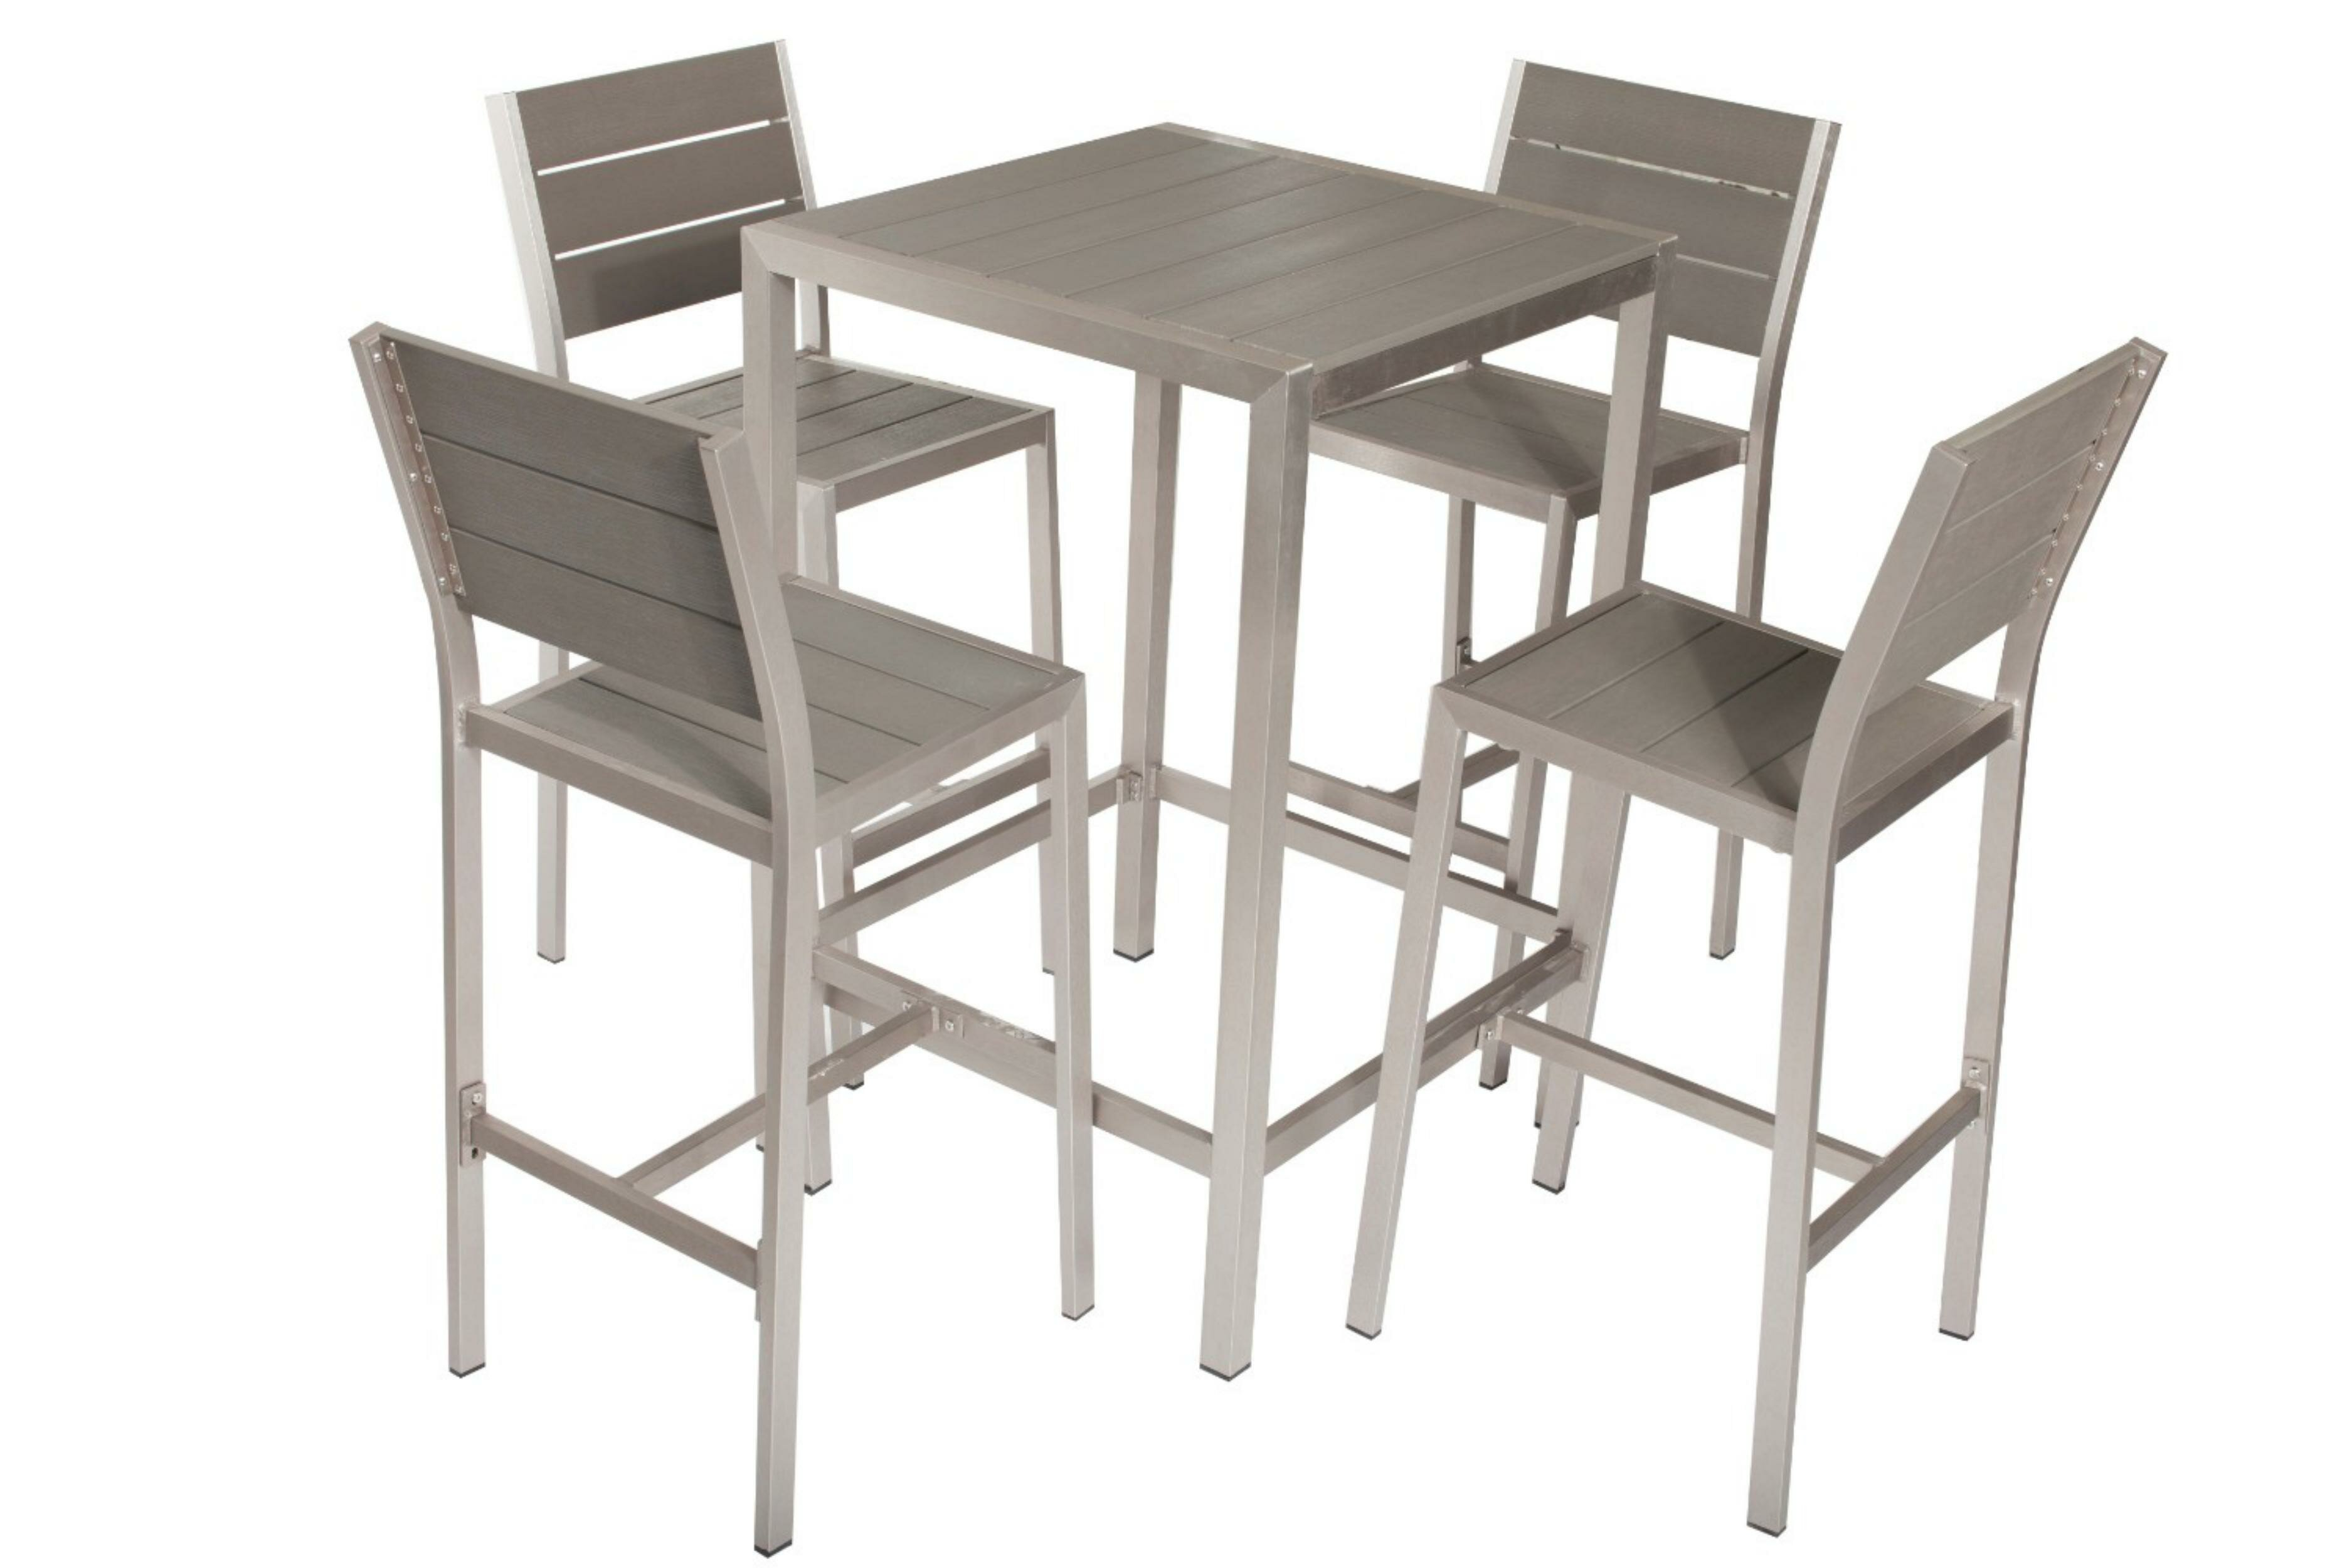 Baird Chicly Classy Anodized Aluminum 5 Piece Dining Set throughout proportions 3750 X 2500